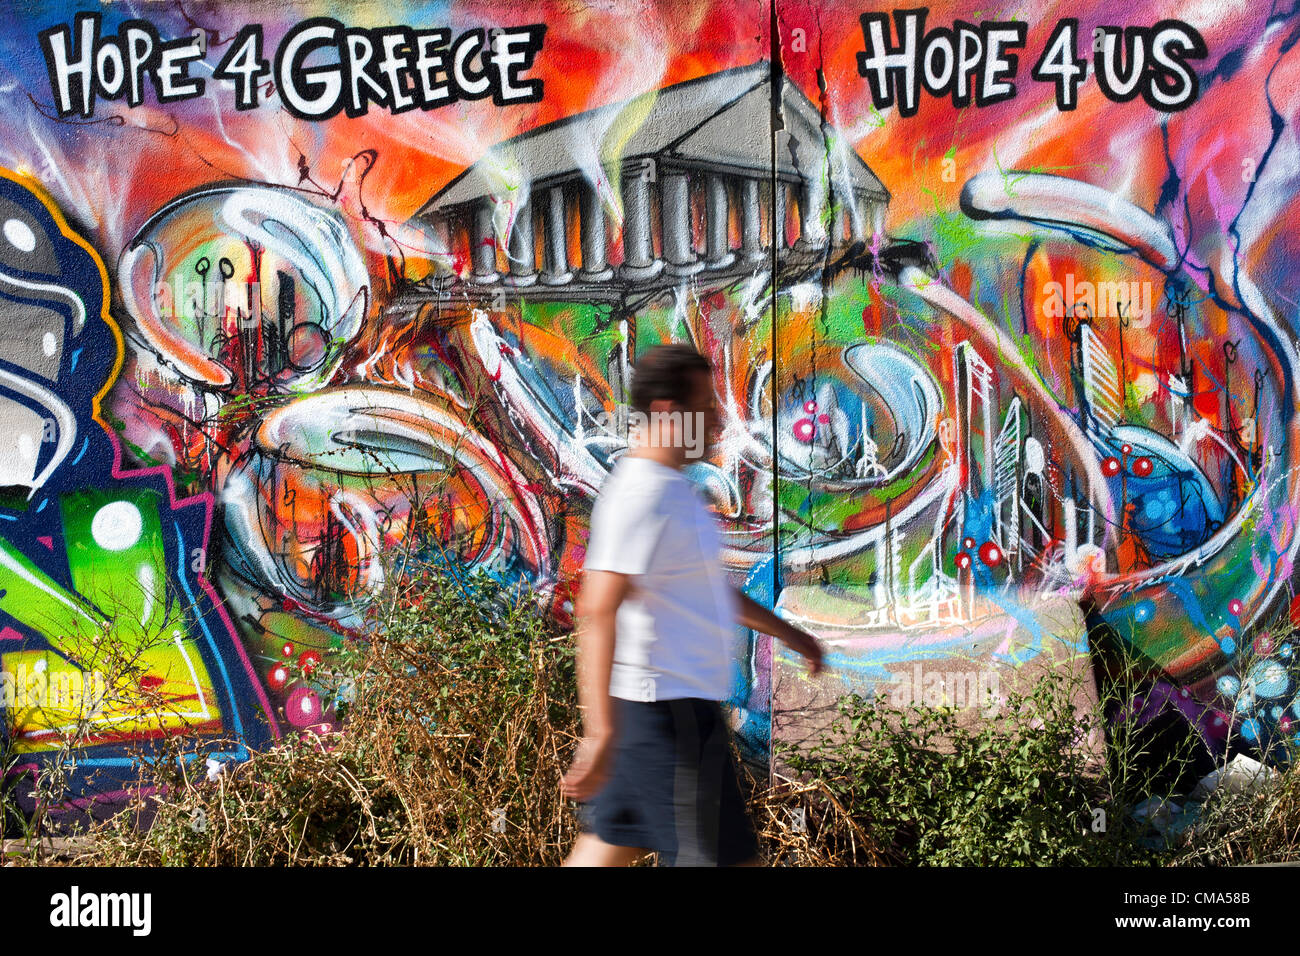 ' Hope for Greece, Hope 4 Us ', says a graffiti on a wall in Lisbon, Portugal, July 1, 2012. Stock Photo